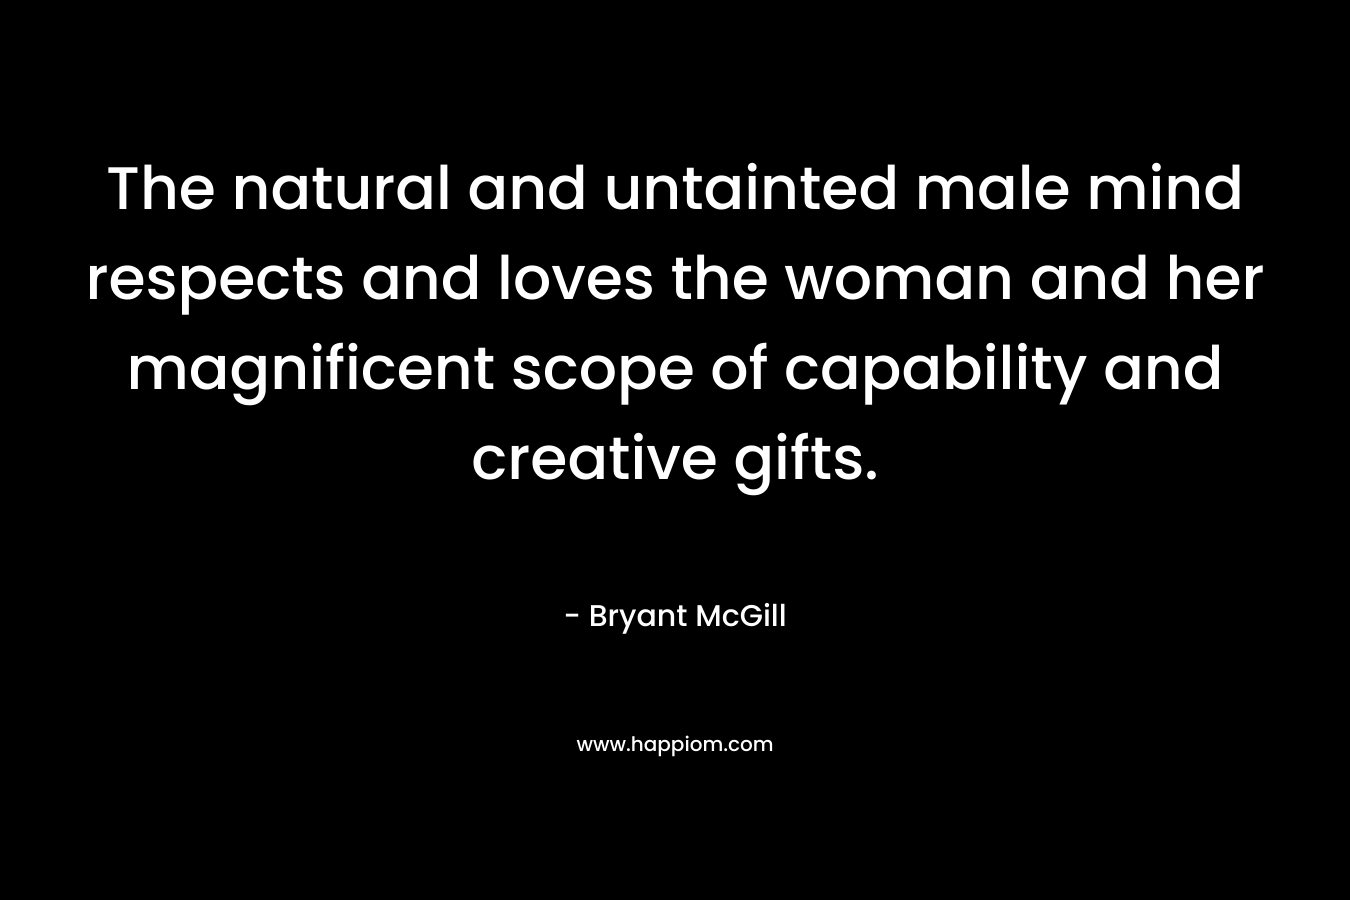 The natural and untainted male mind respects and loves the woman and her magnificent scope of capability and creative gifts. – Bryant McGill